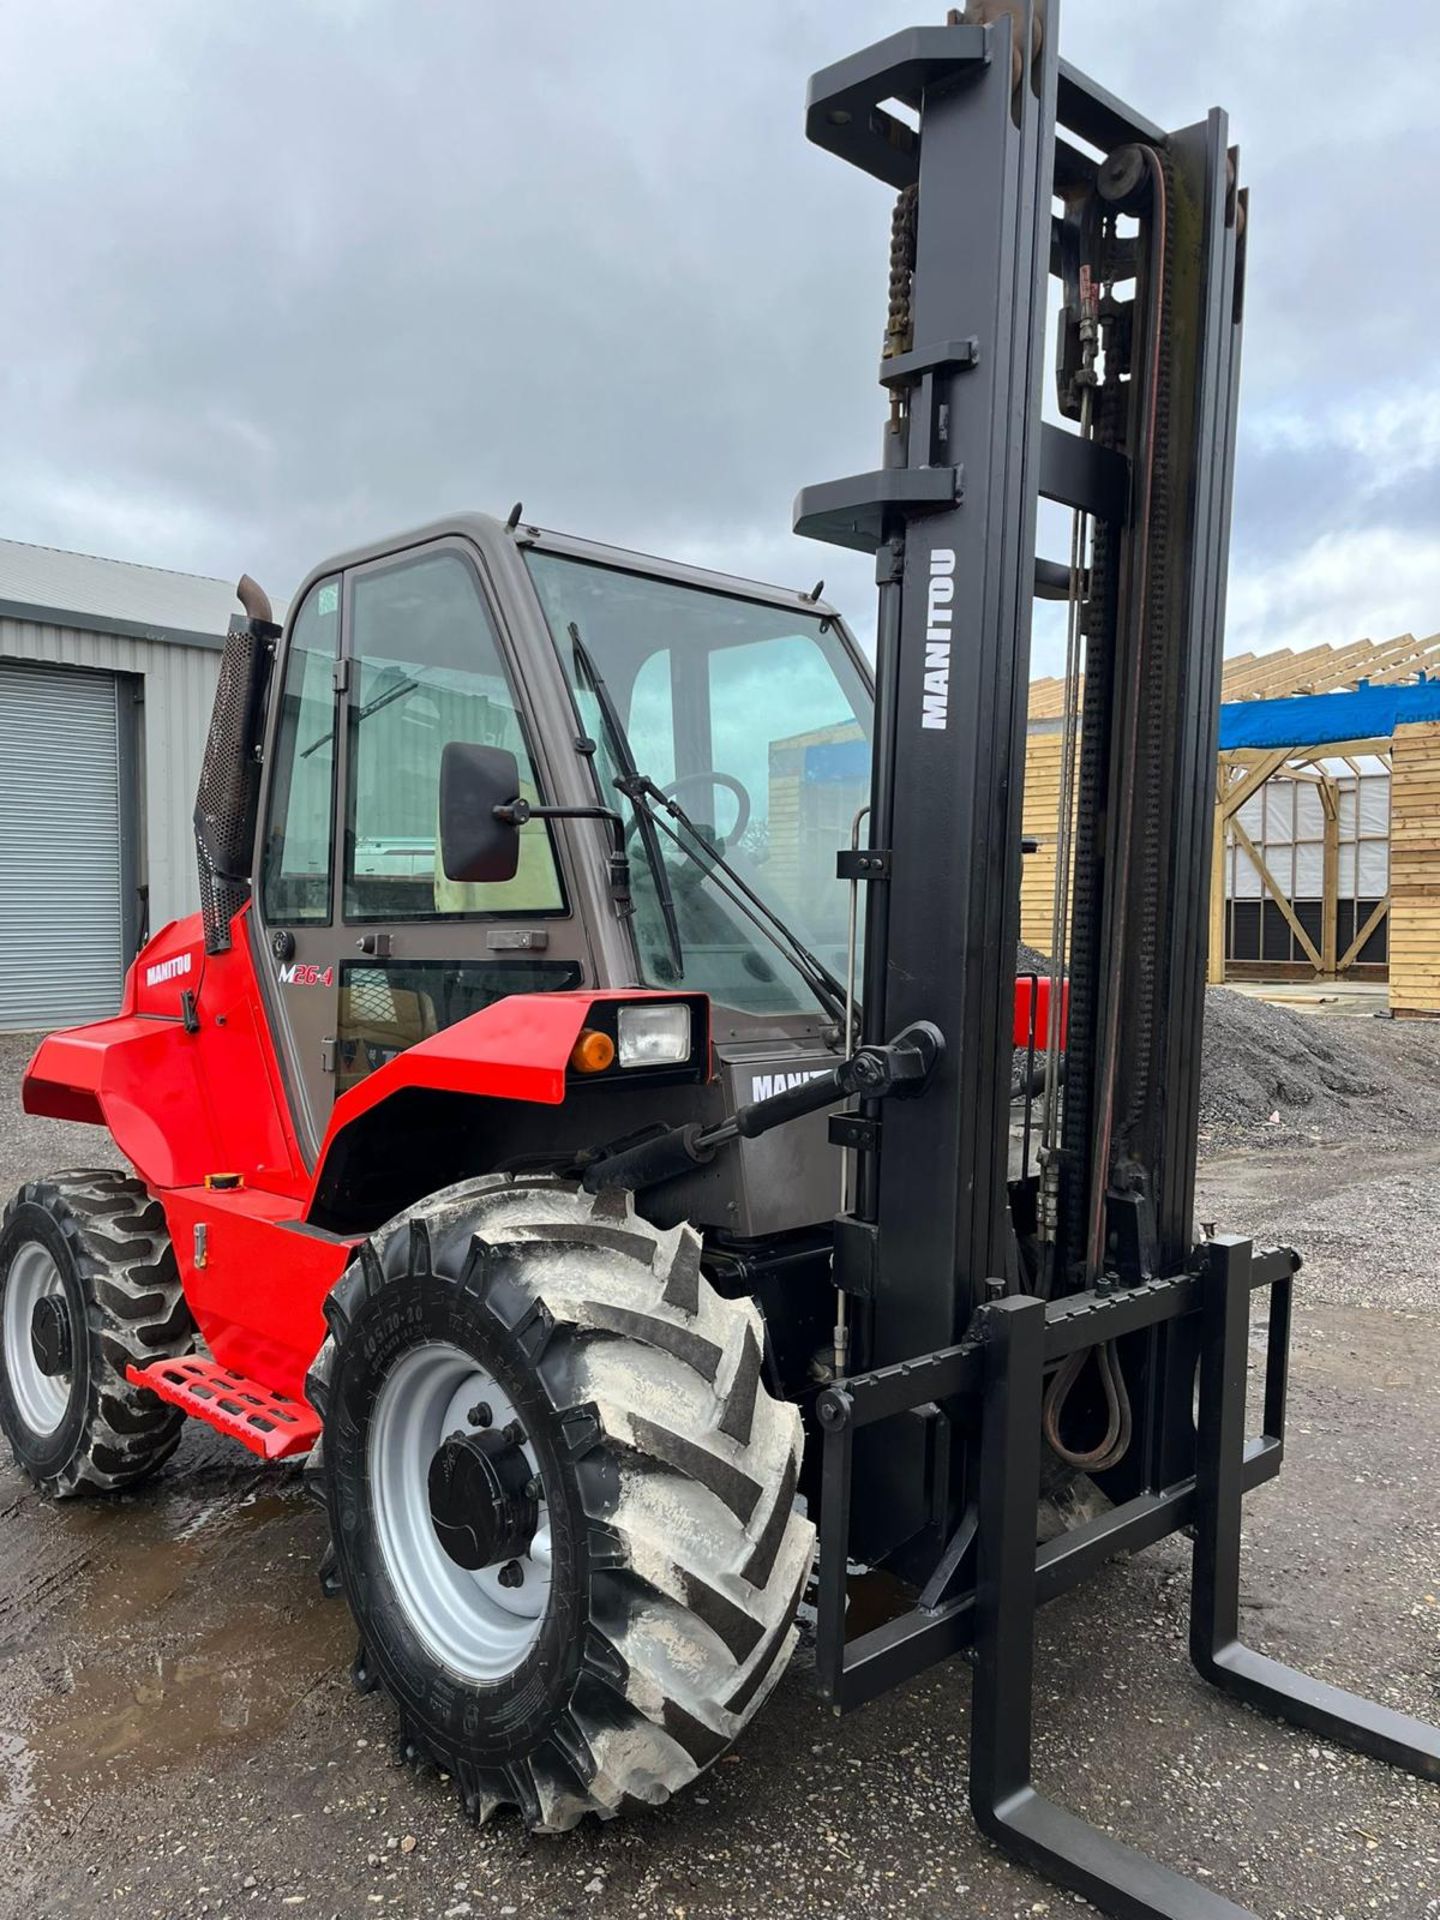 2017, MANITOU - M26, 2.6 Tonne (4WD) Forklift Truck - Image 6 of 6